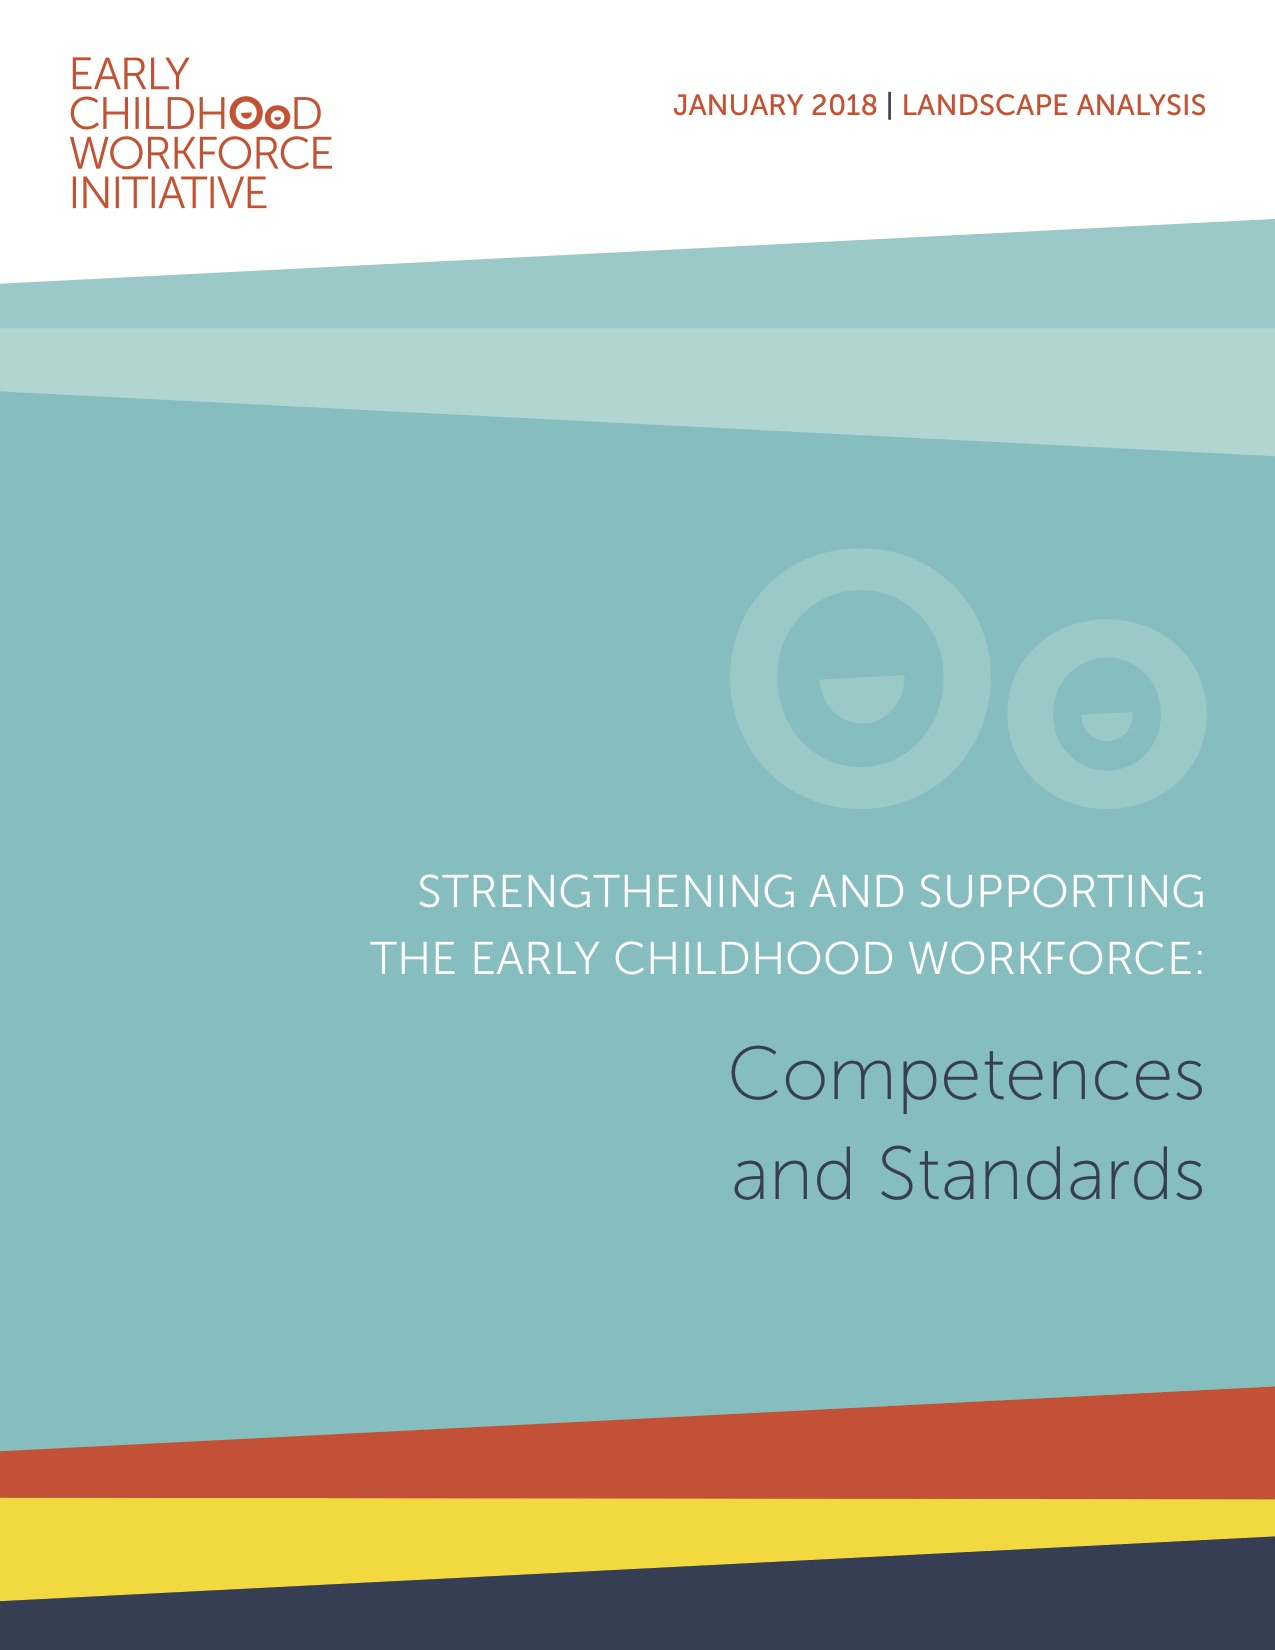 Competences_Standards_cover.jpg 